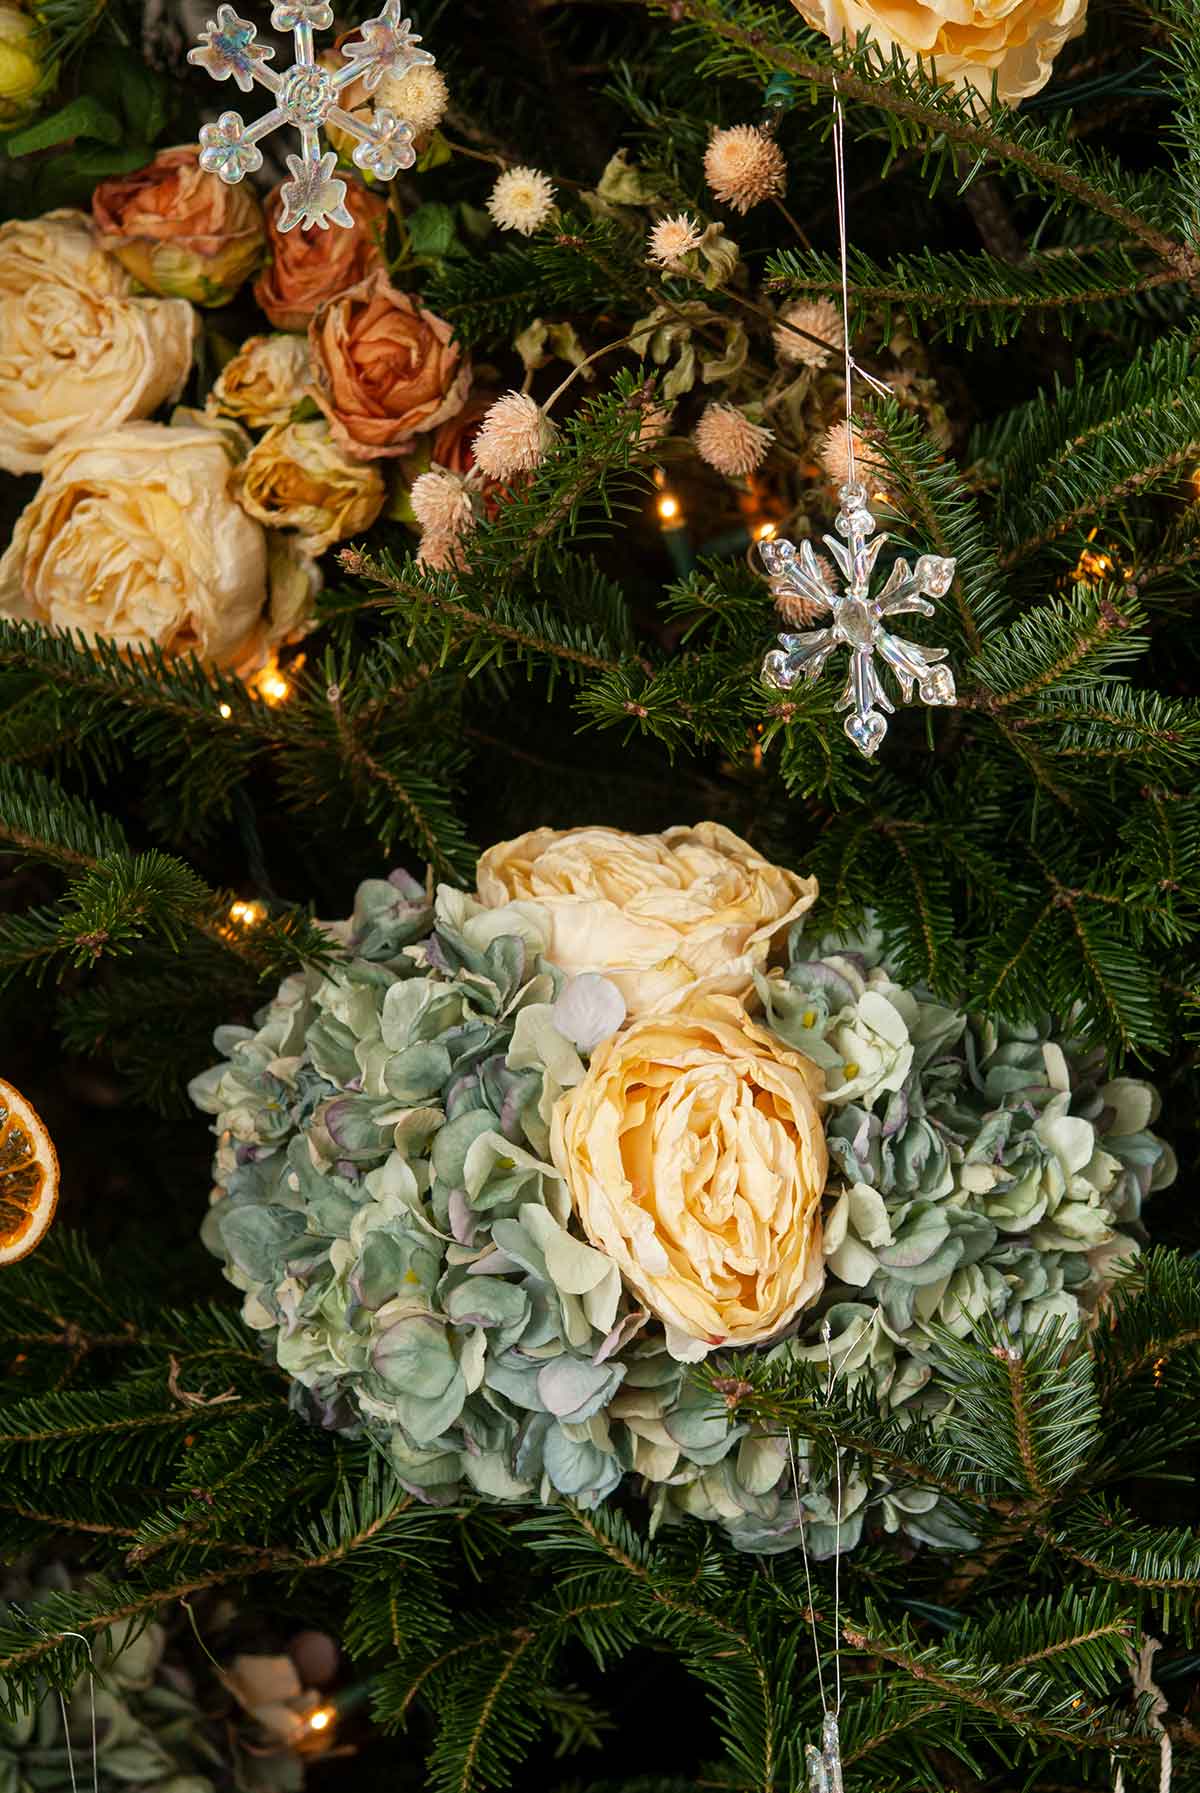 Hydrangea and roses in a Christmas tree with snow flake ornaments.